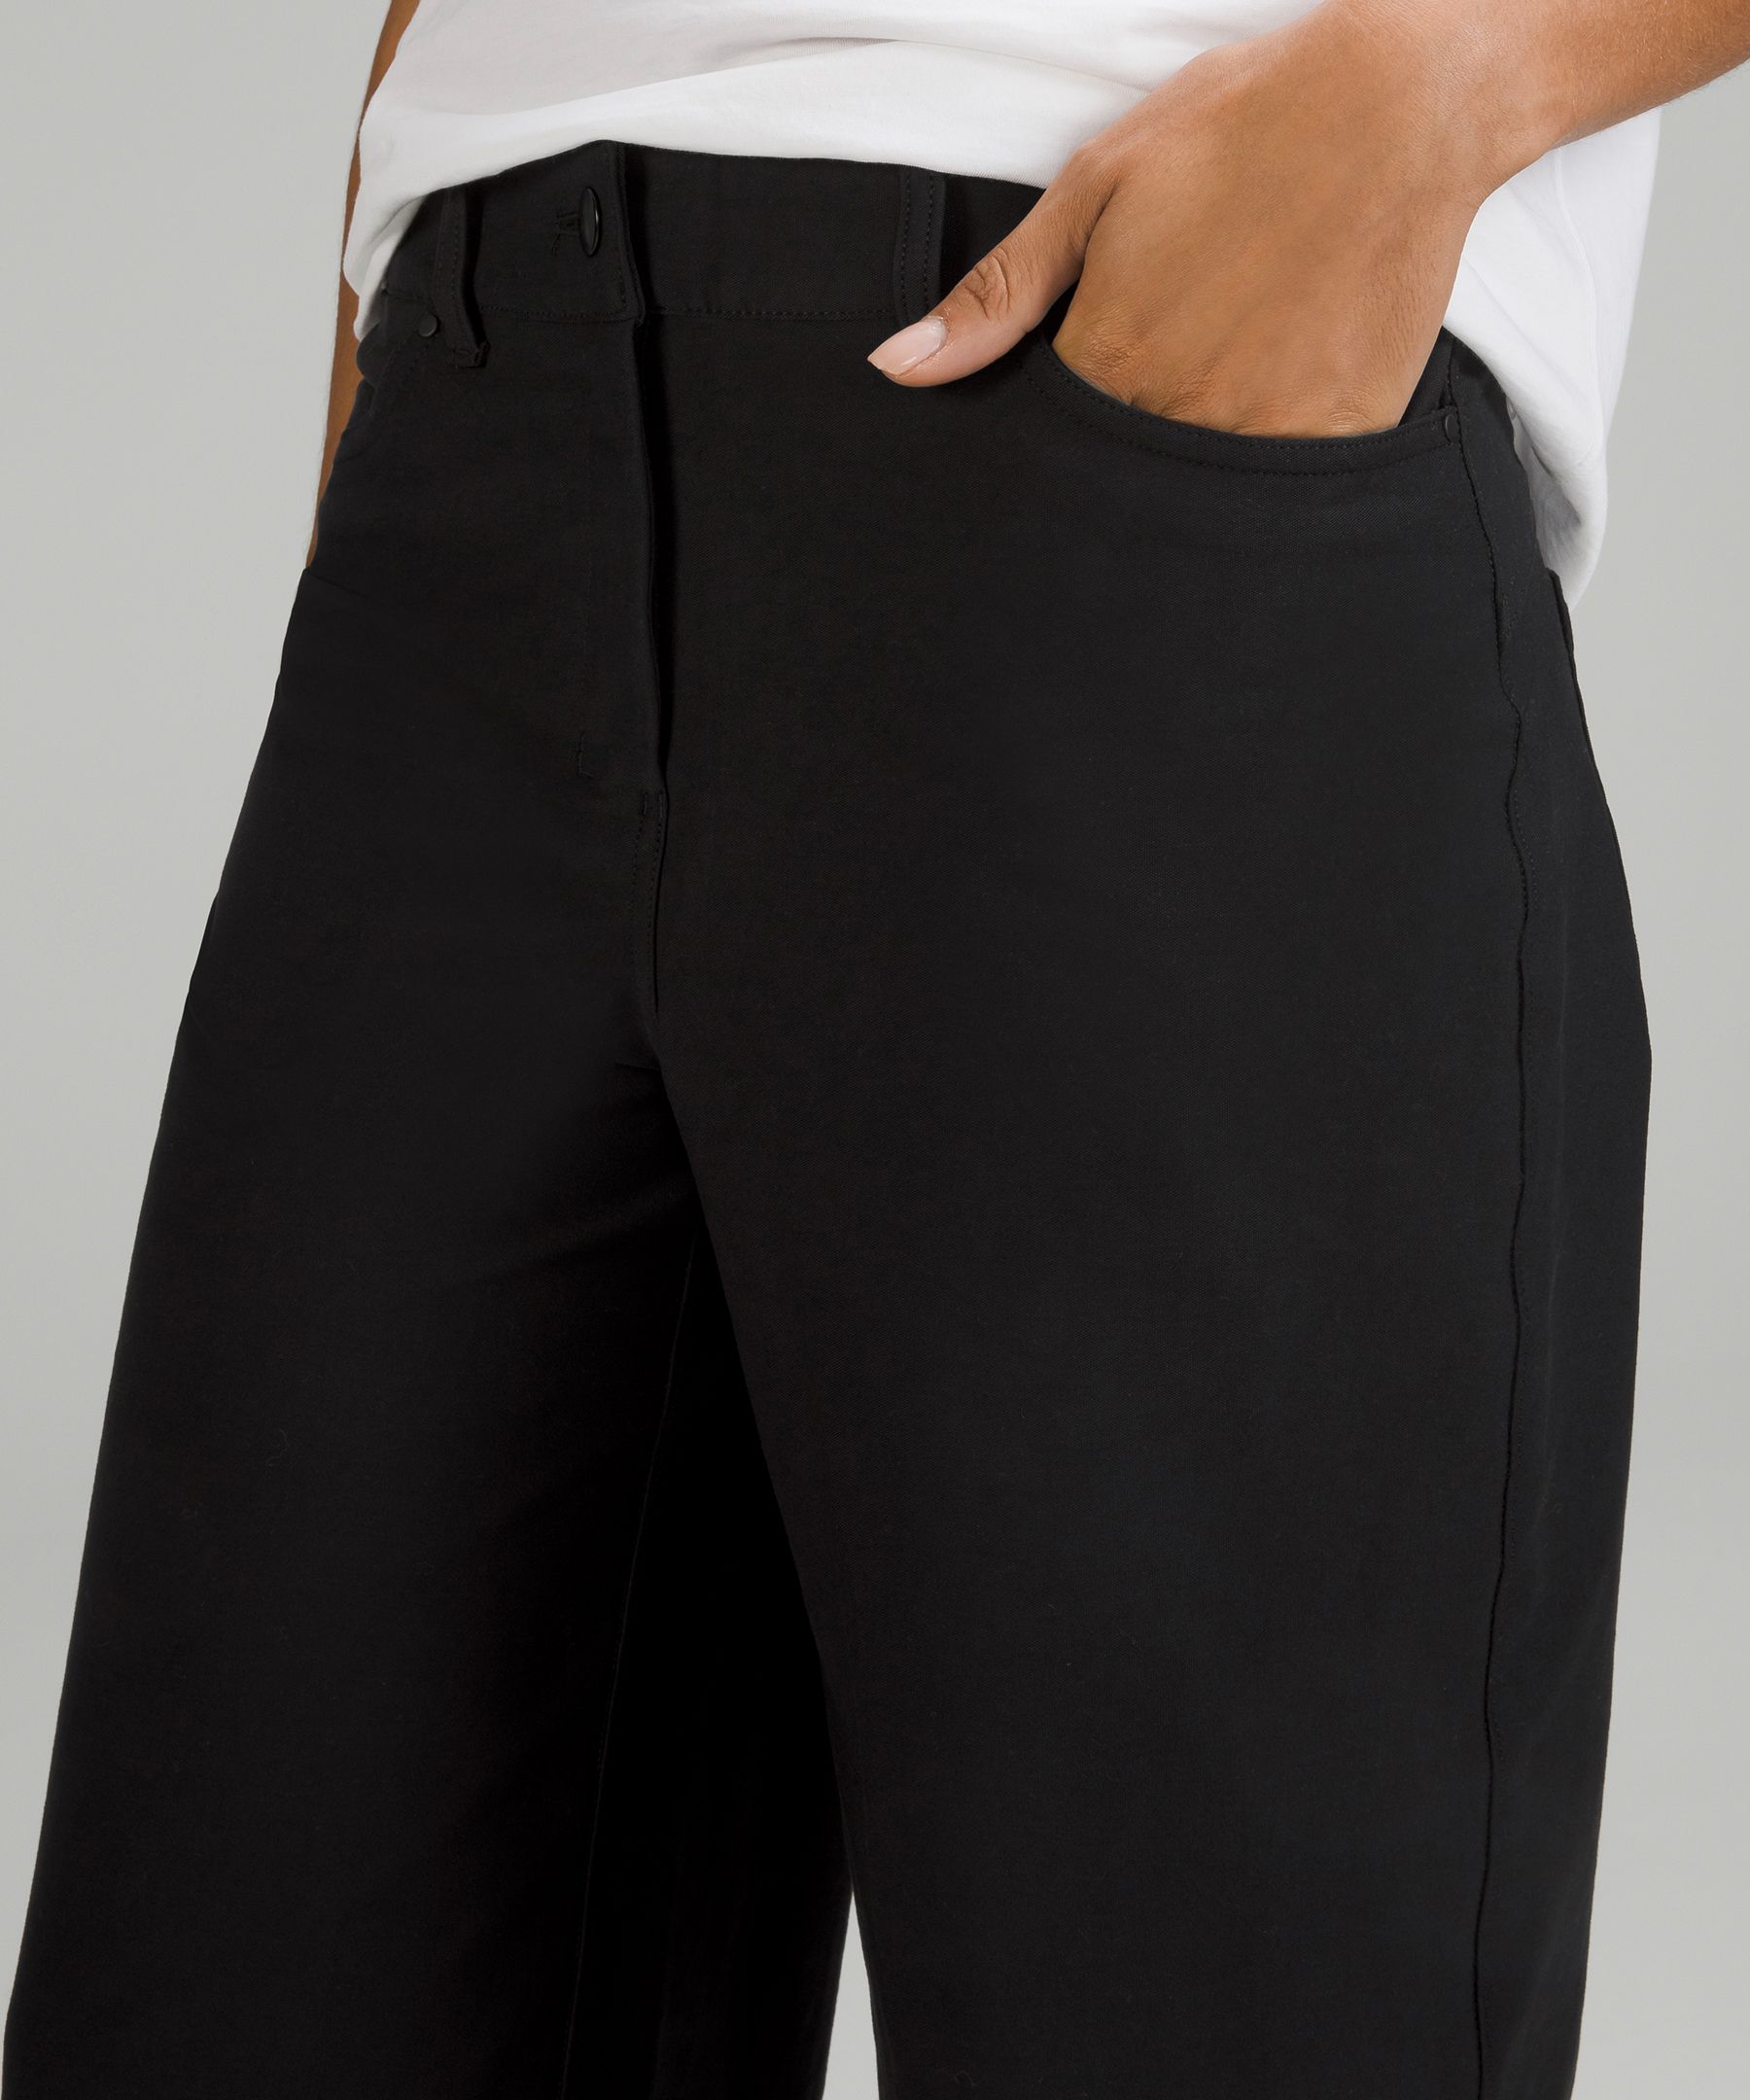 Lululemon's New Office and Back to School Pants! City Sleek, Keep Moving &  Here to There 